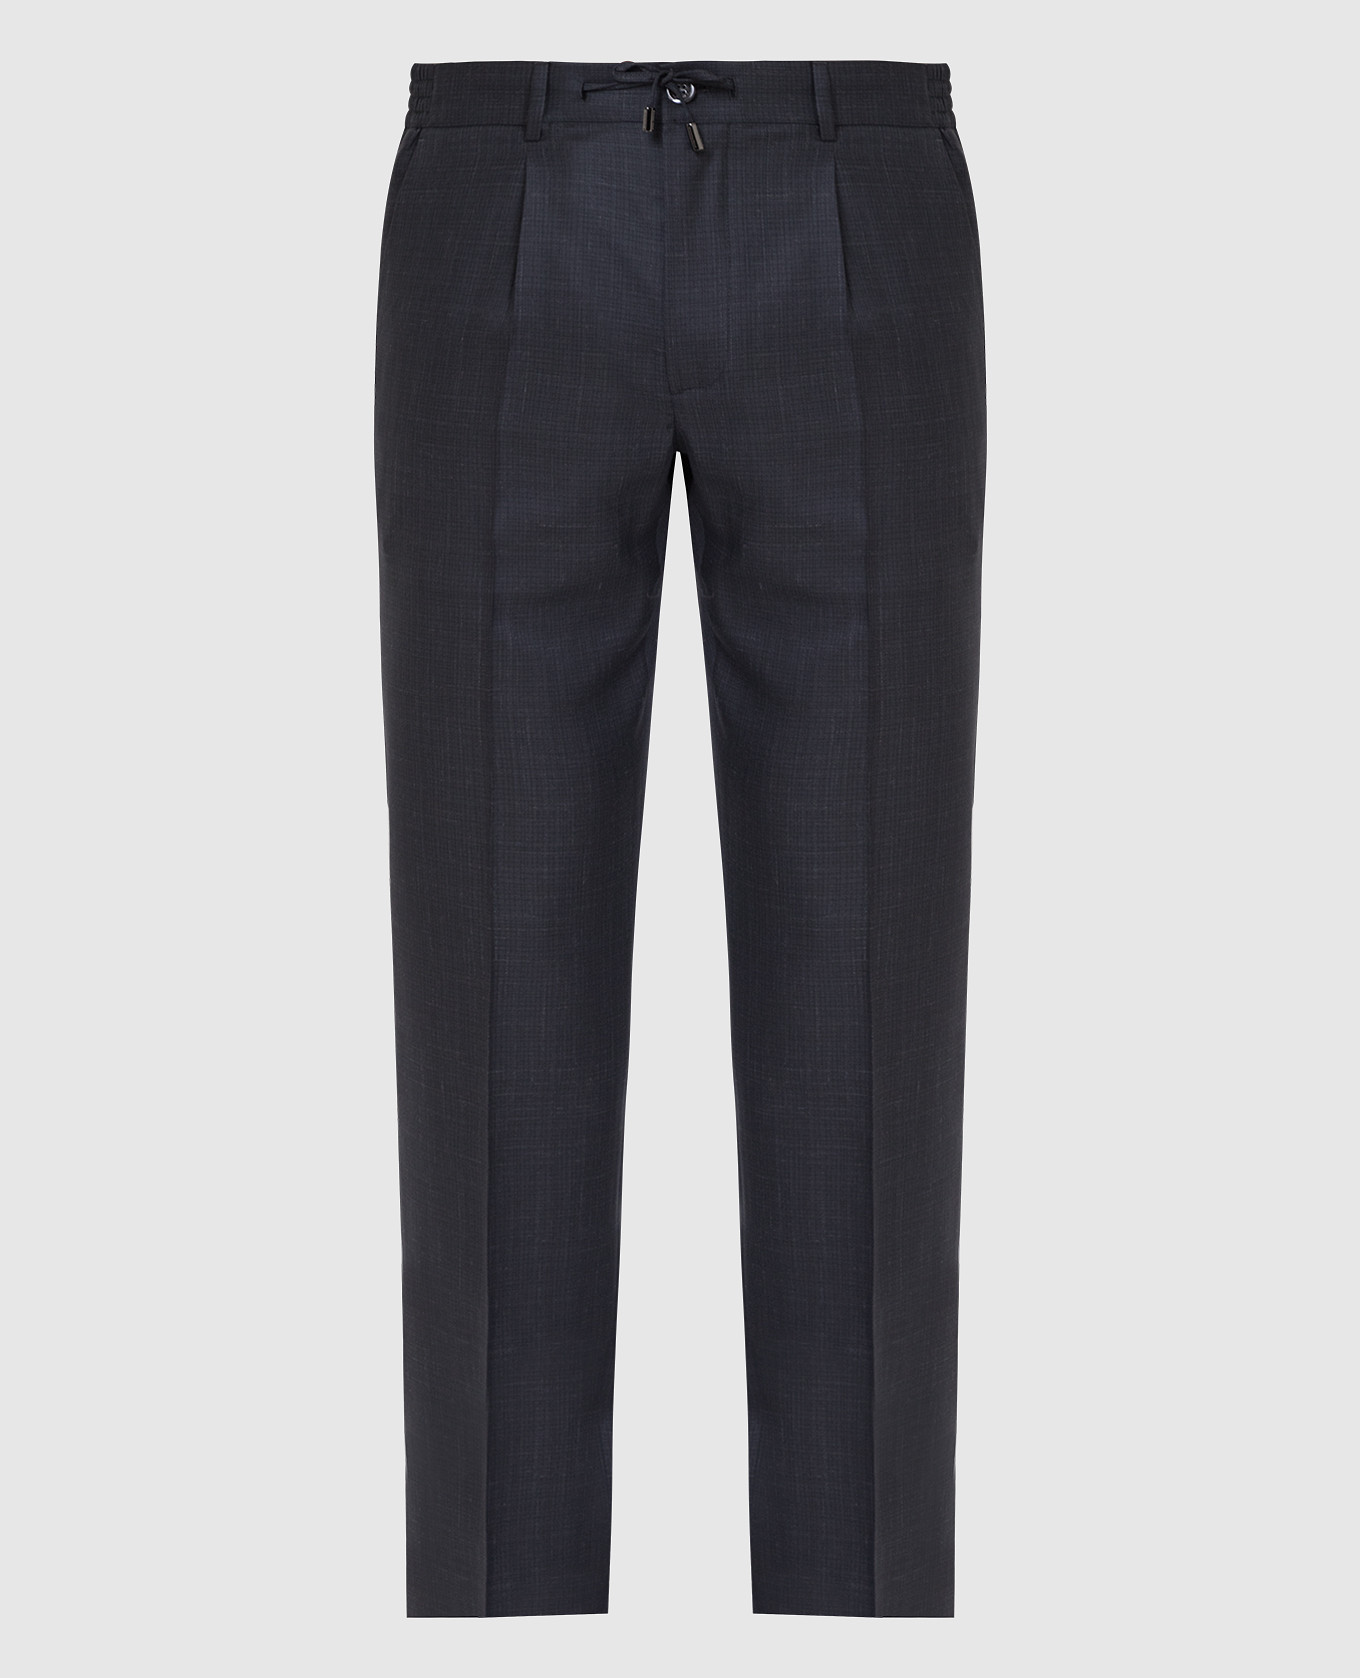 Charcoal patterned wool and silk slacks